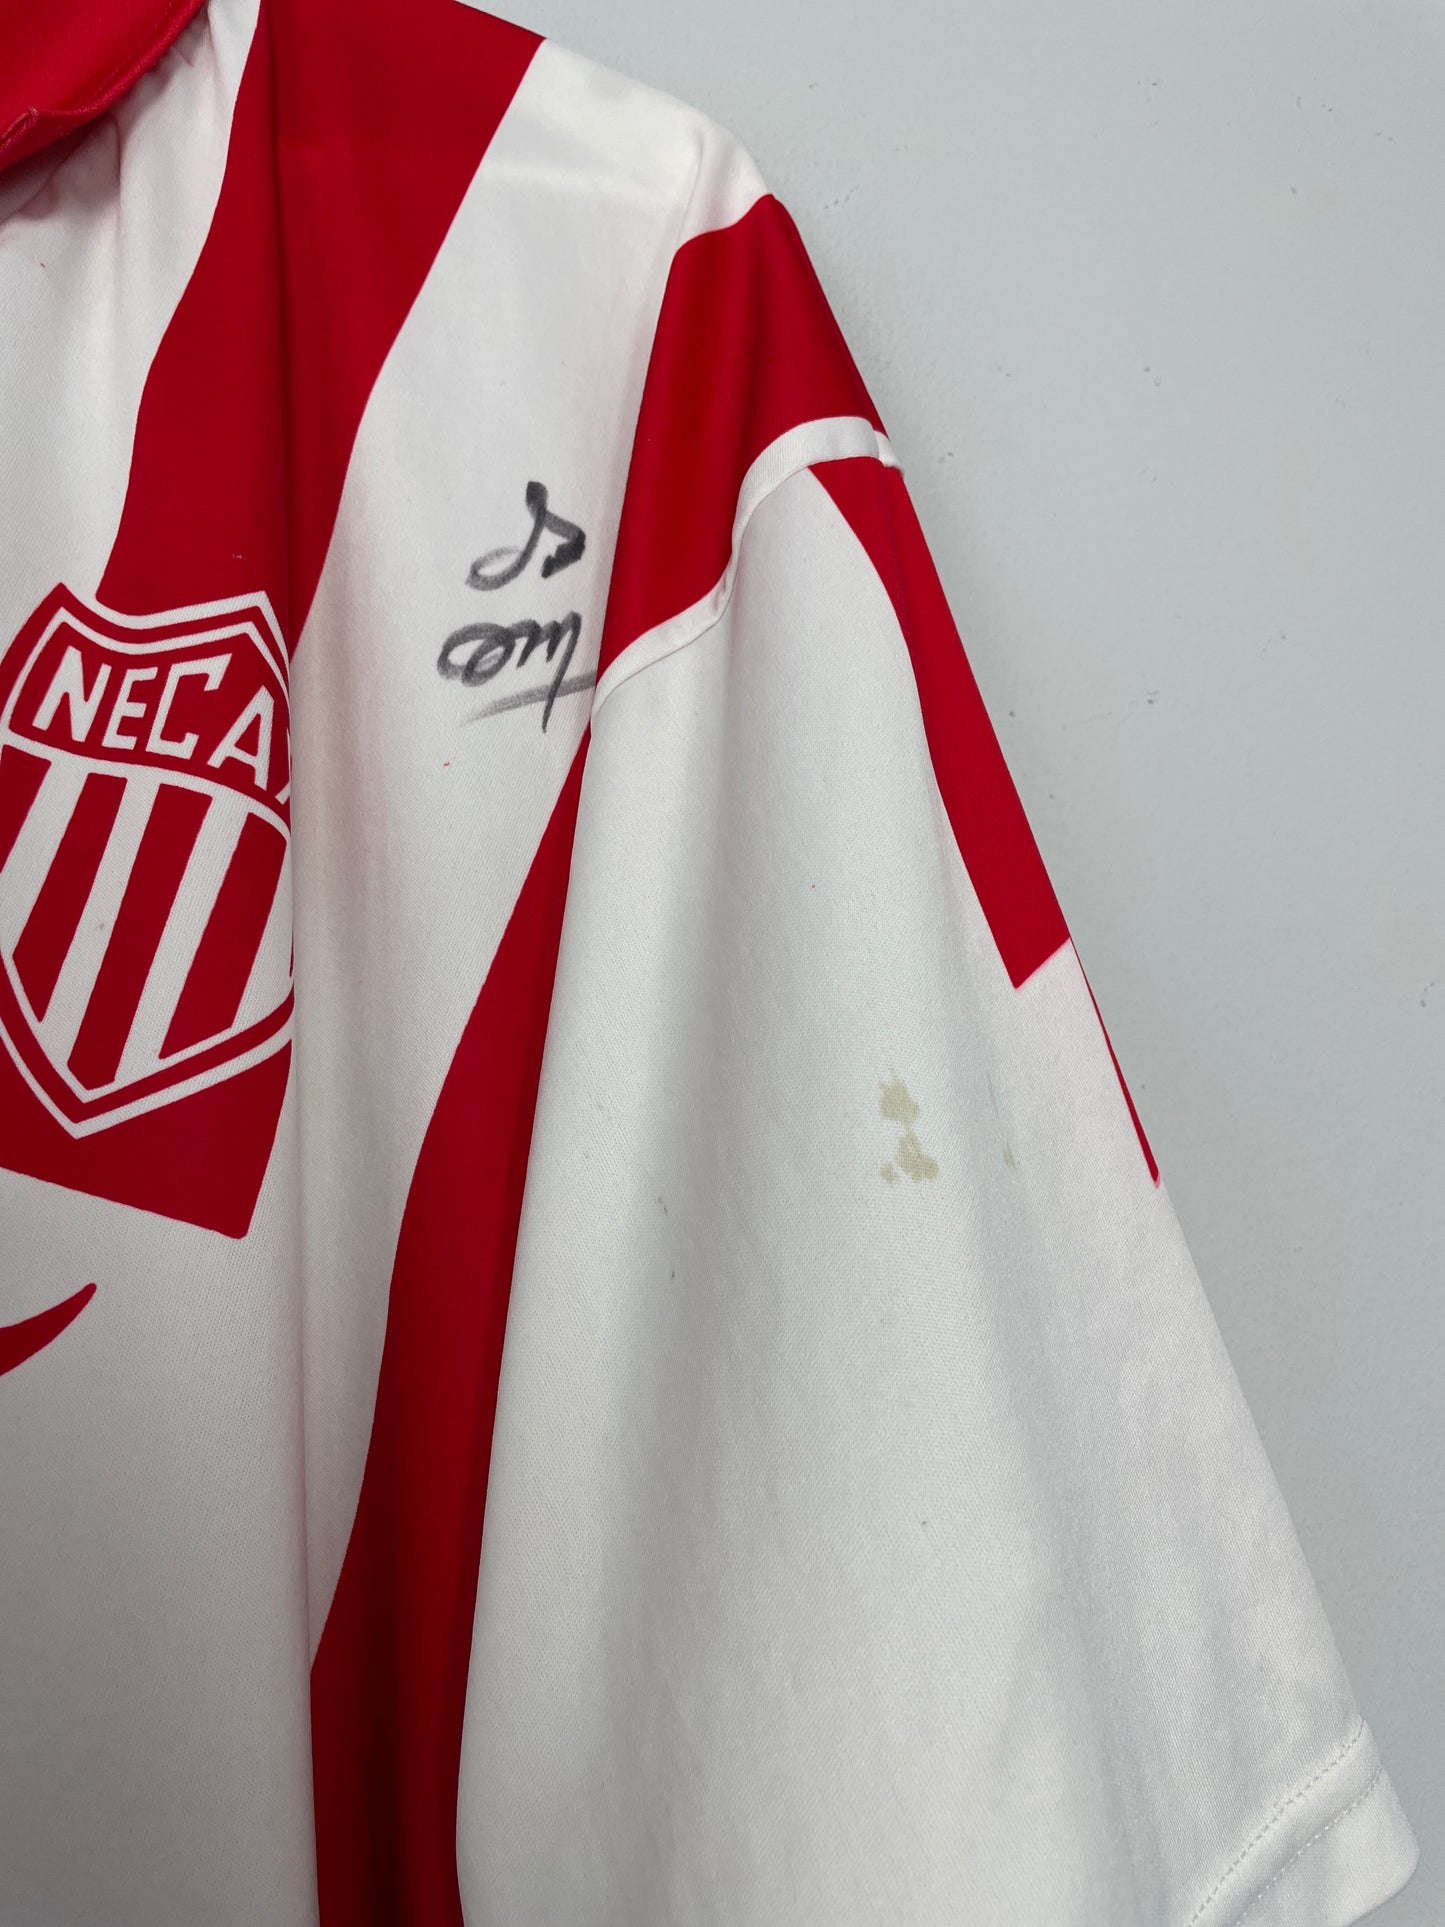 1994/95 NECAXA #4 *PLAYER ISSUE + SIGNED* HOME SHIRT (L) ADIDAS